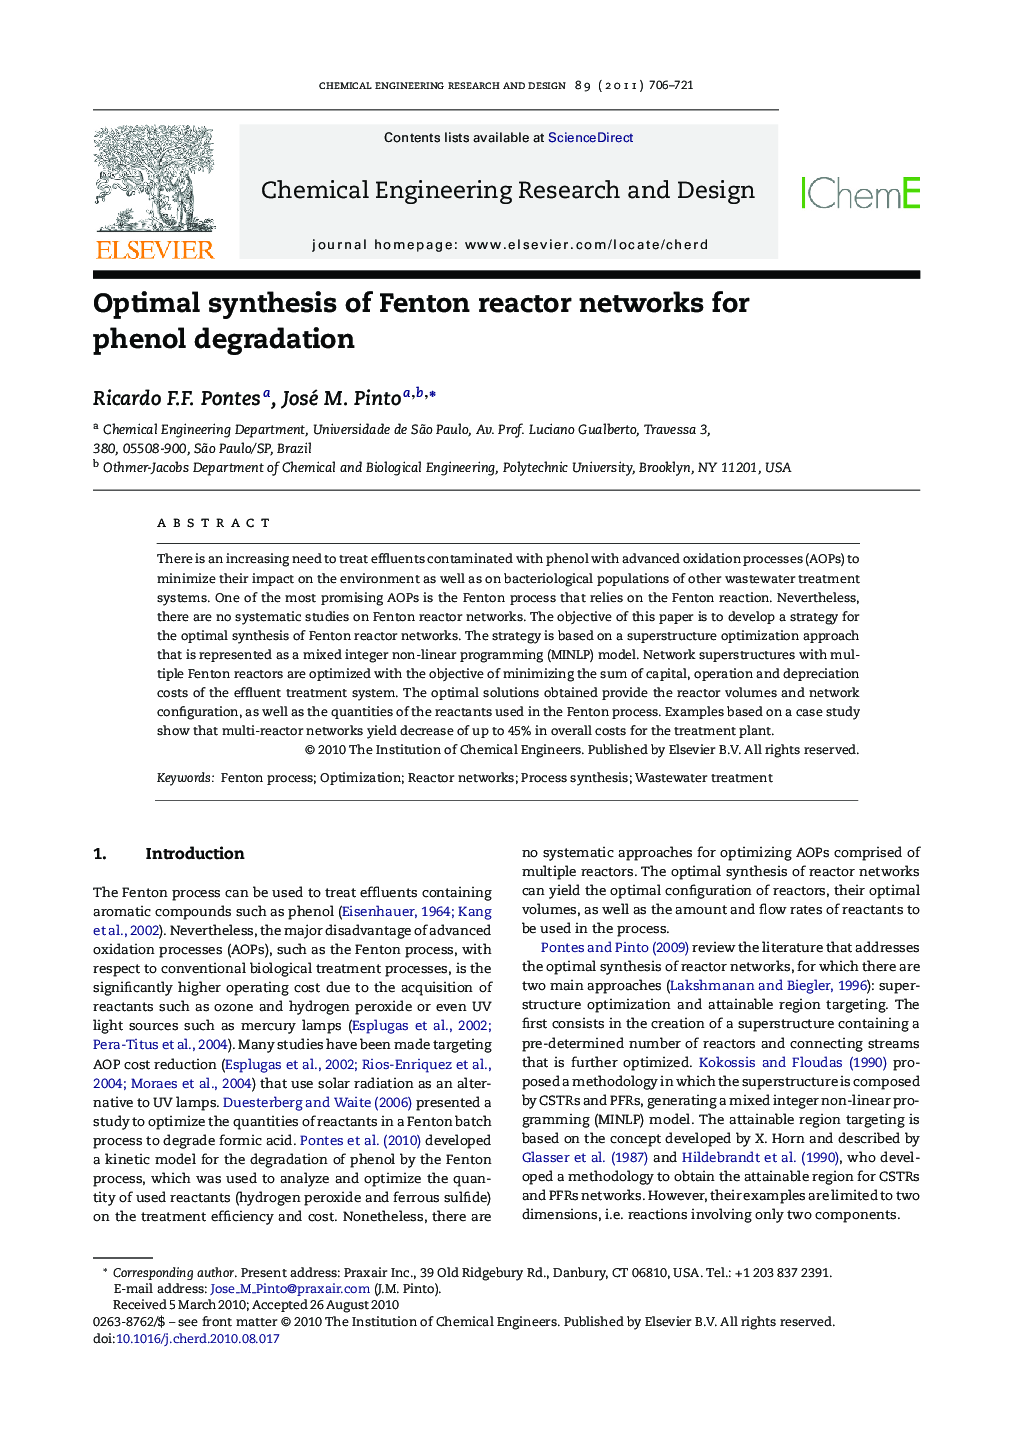 Optimal synthesis of Fenton reactor networks for phenol degradation